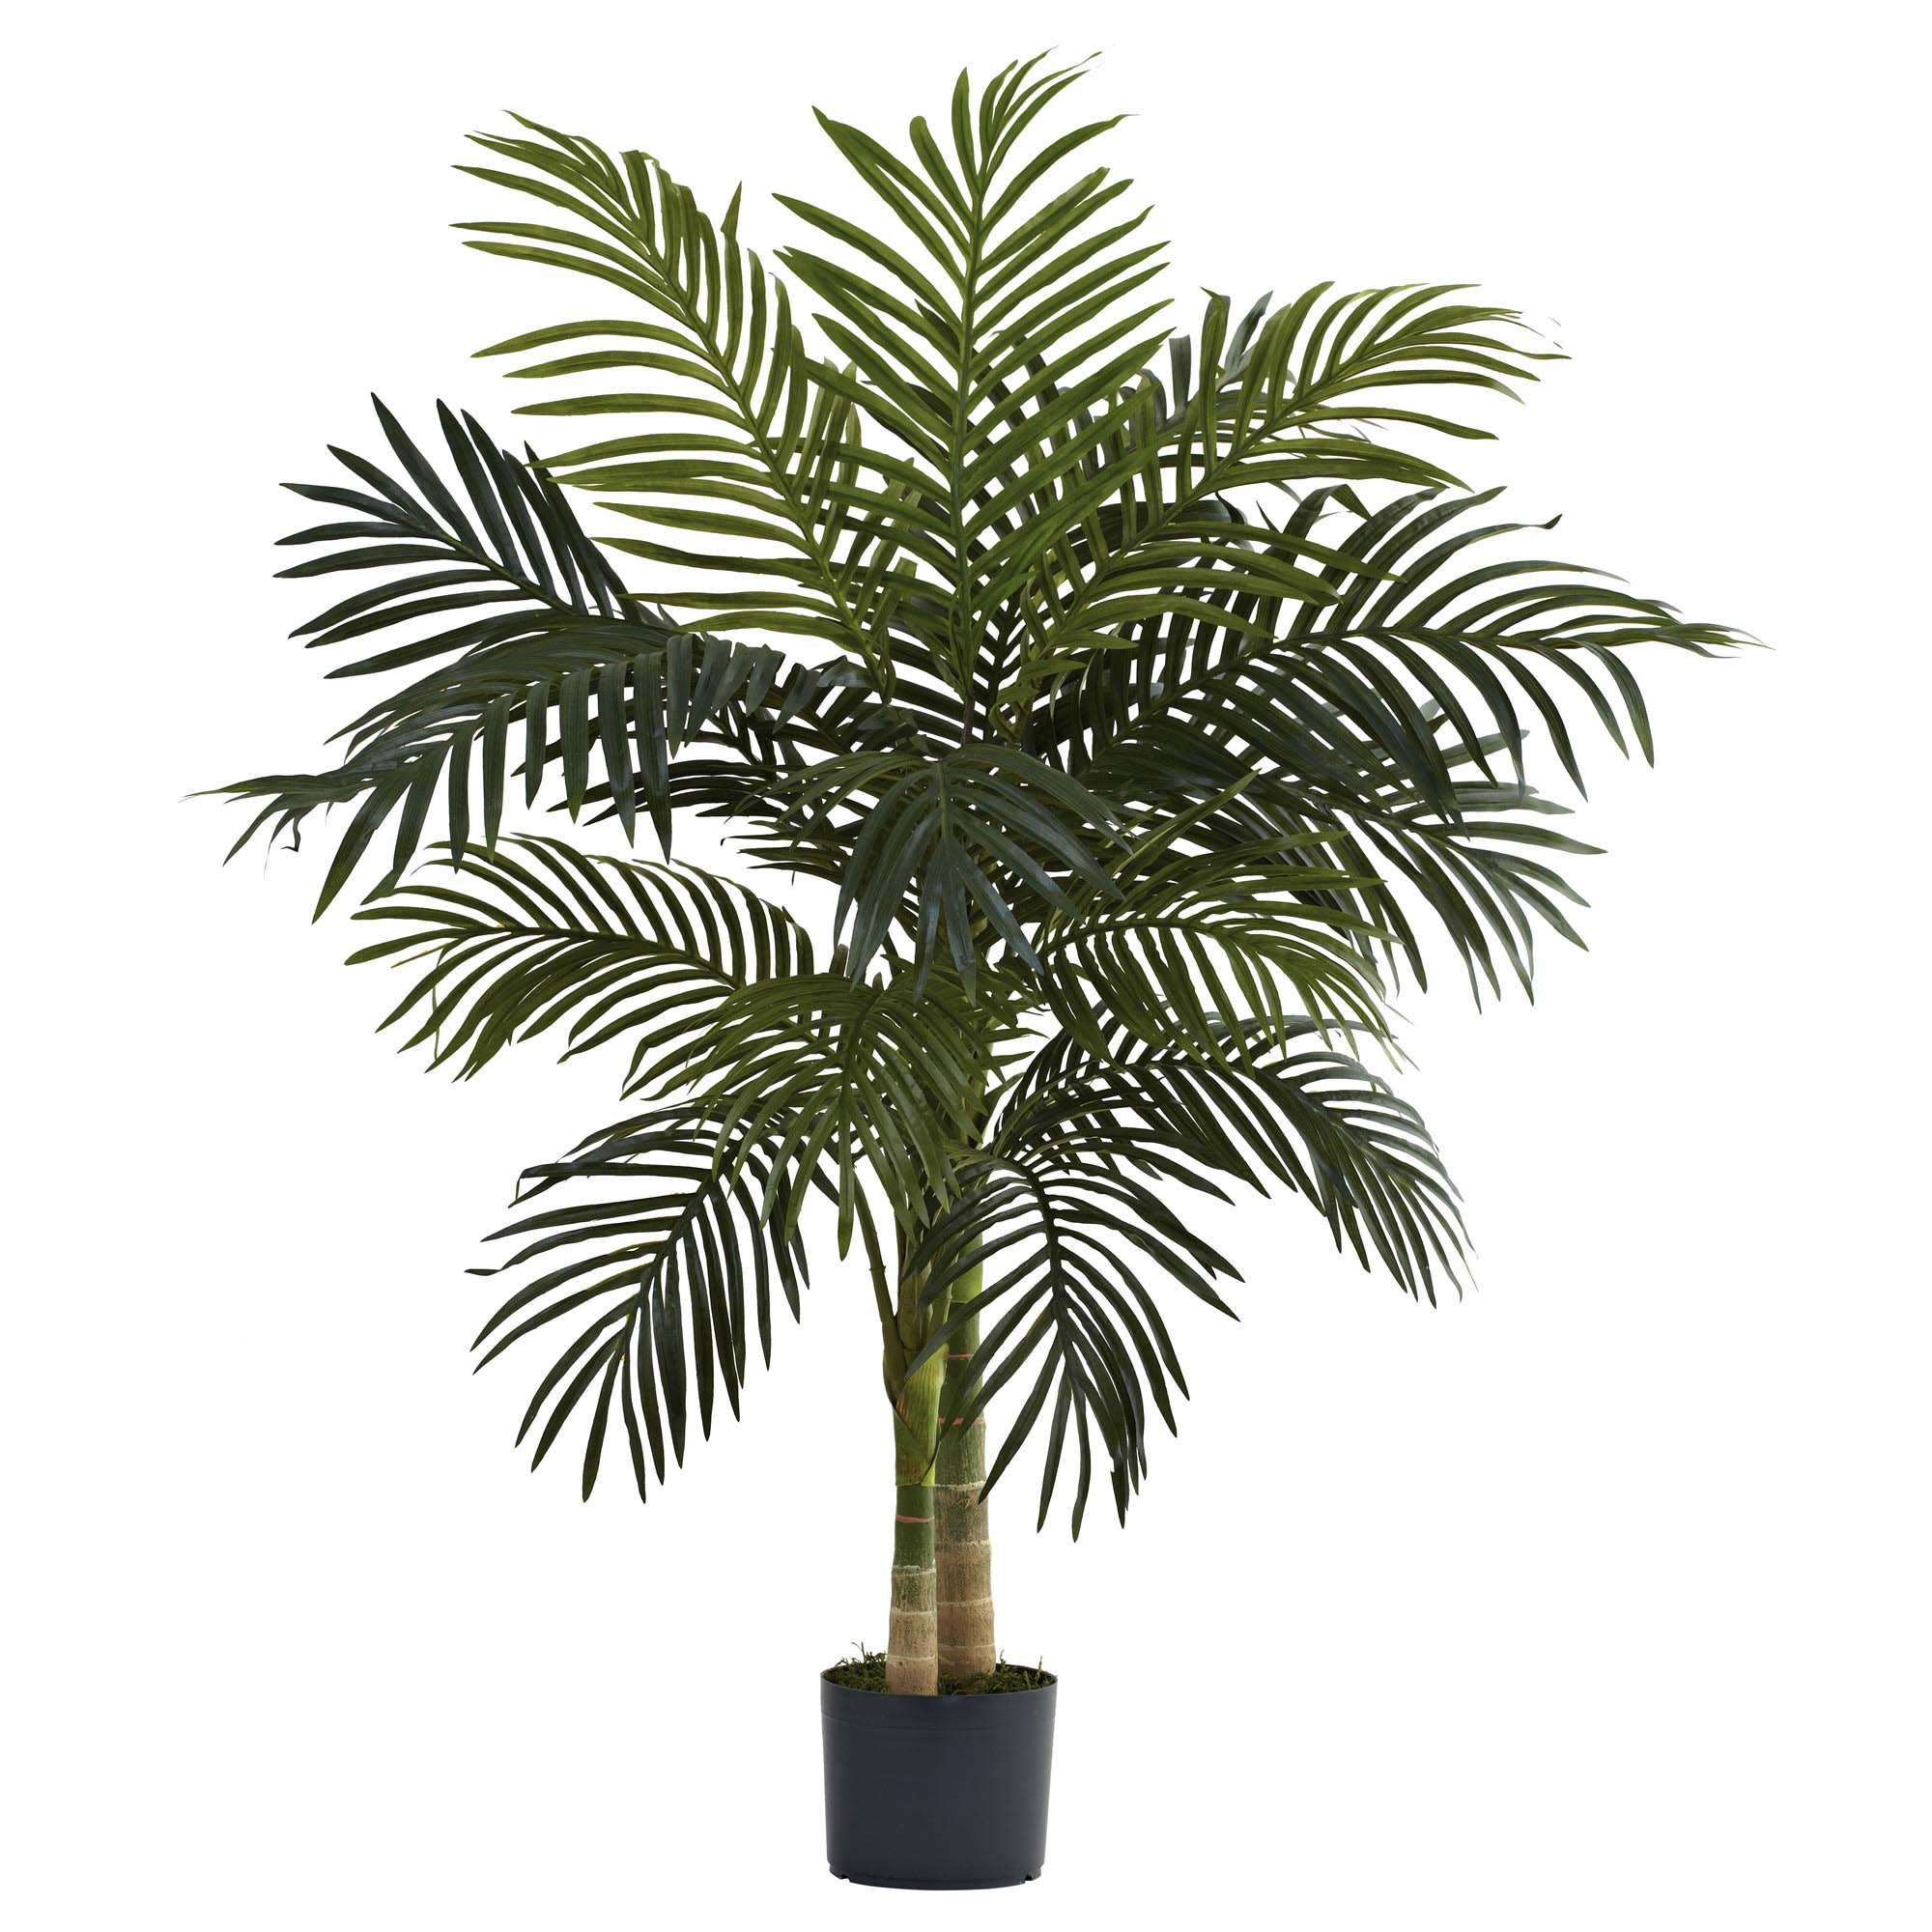 4 foot Artificial Golden Cane Palm Tree: Potted